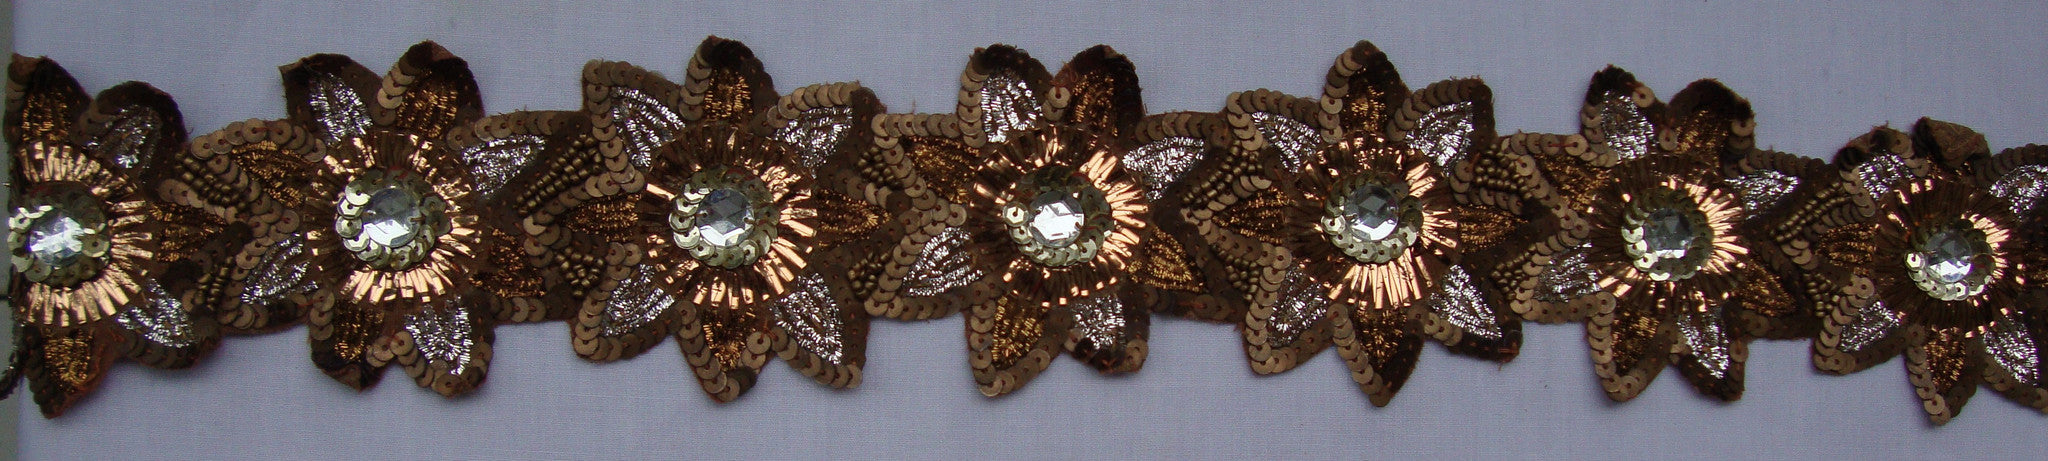 Bronze Star Sequin Trimming (Sold as a 2 yard piece)